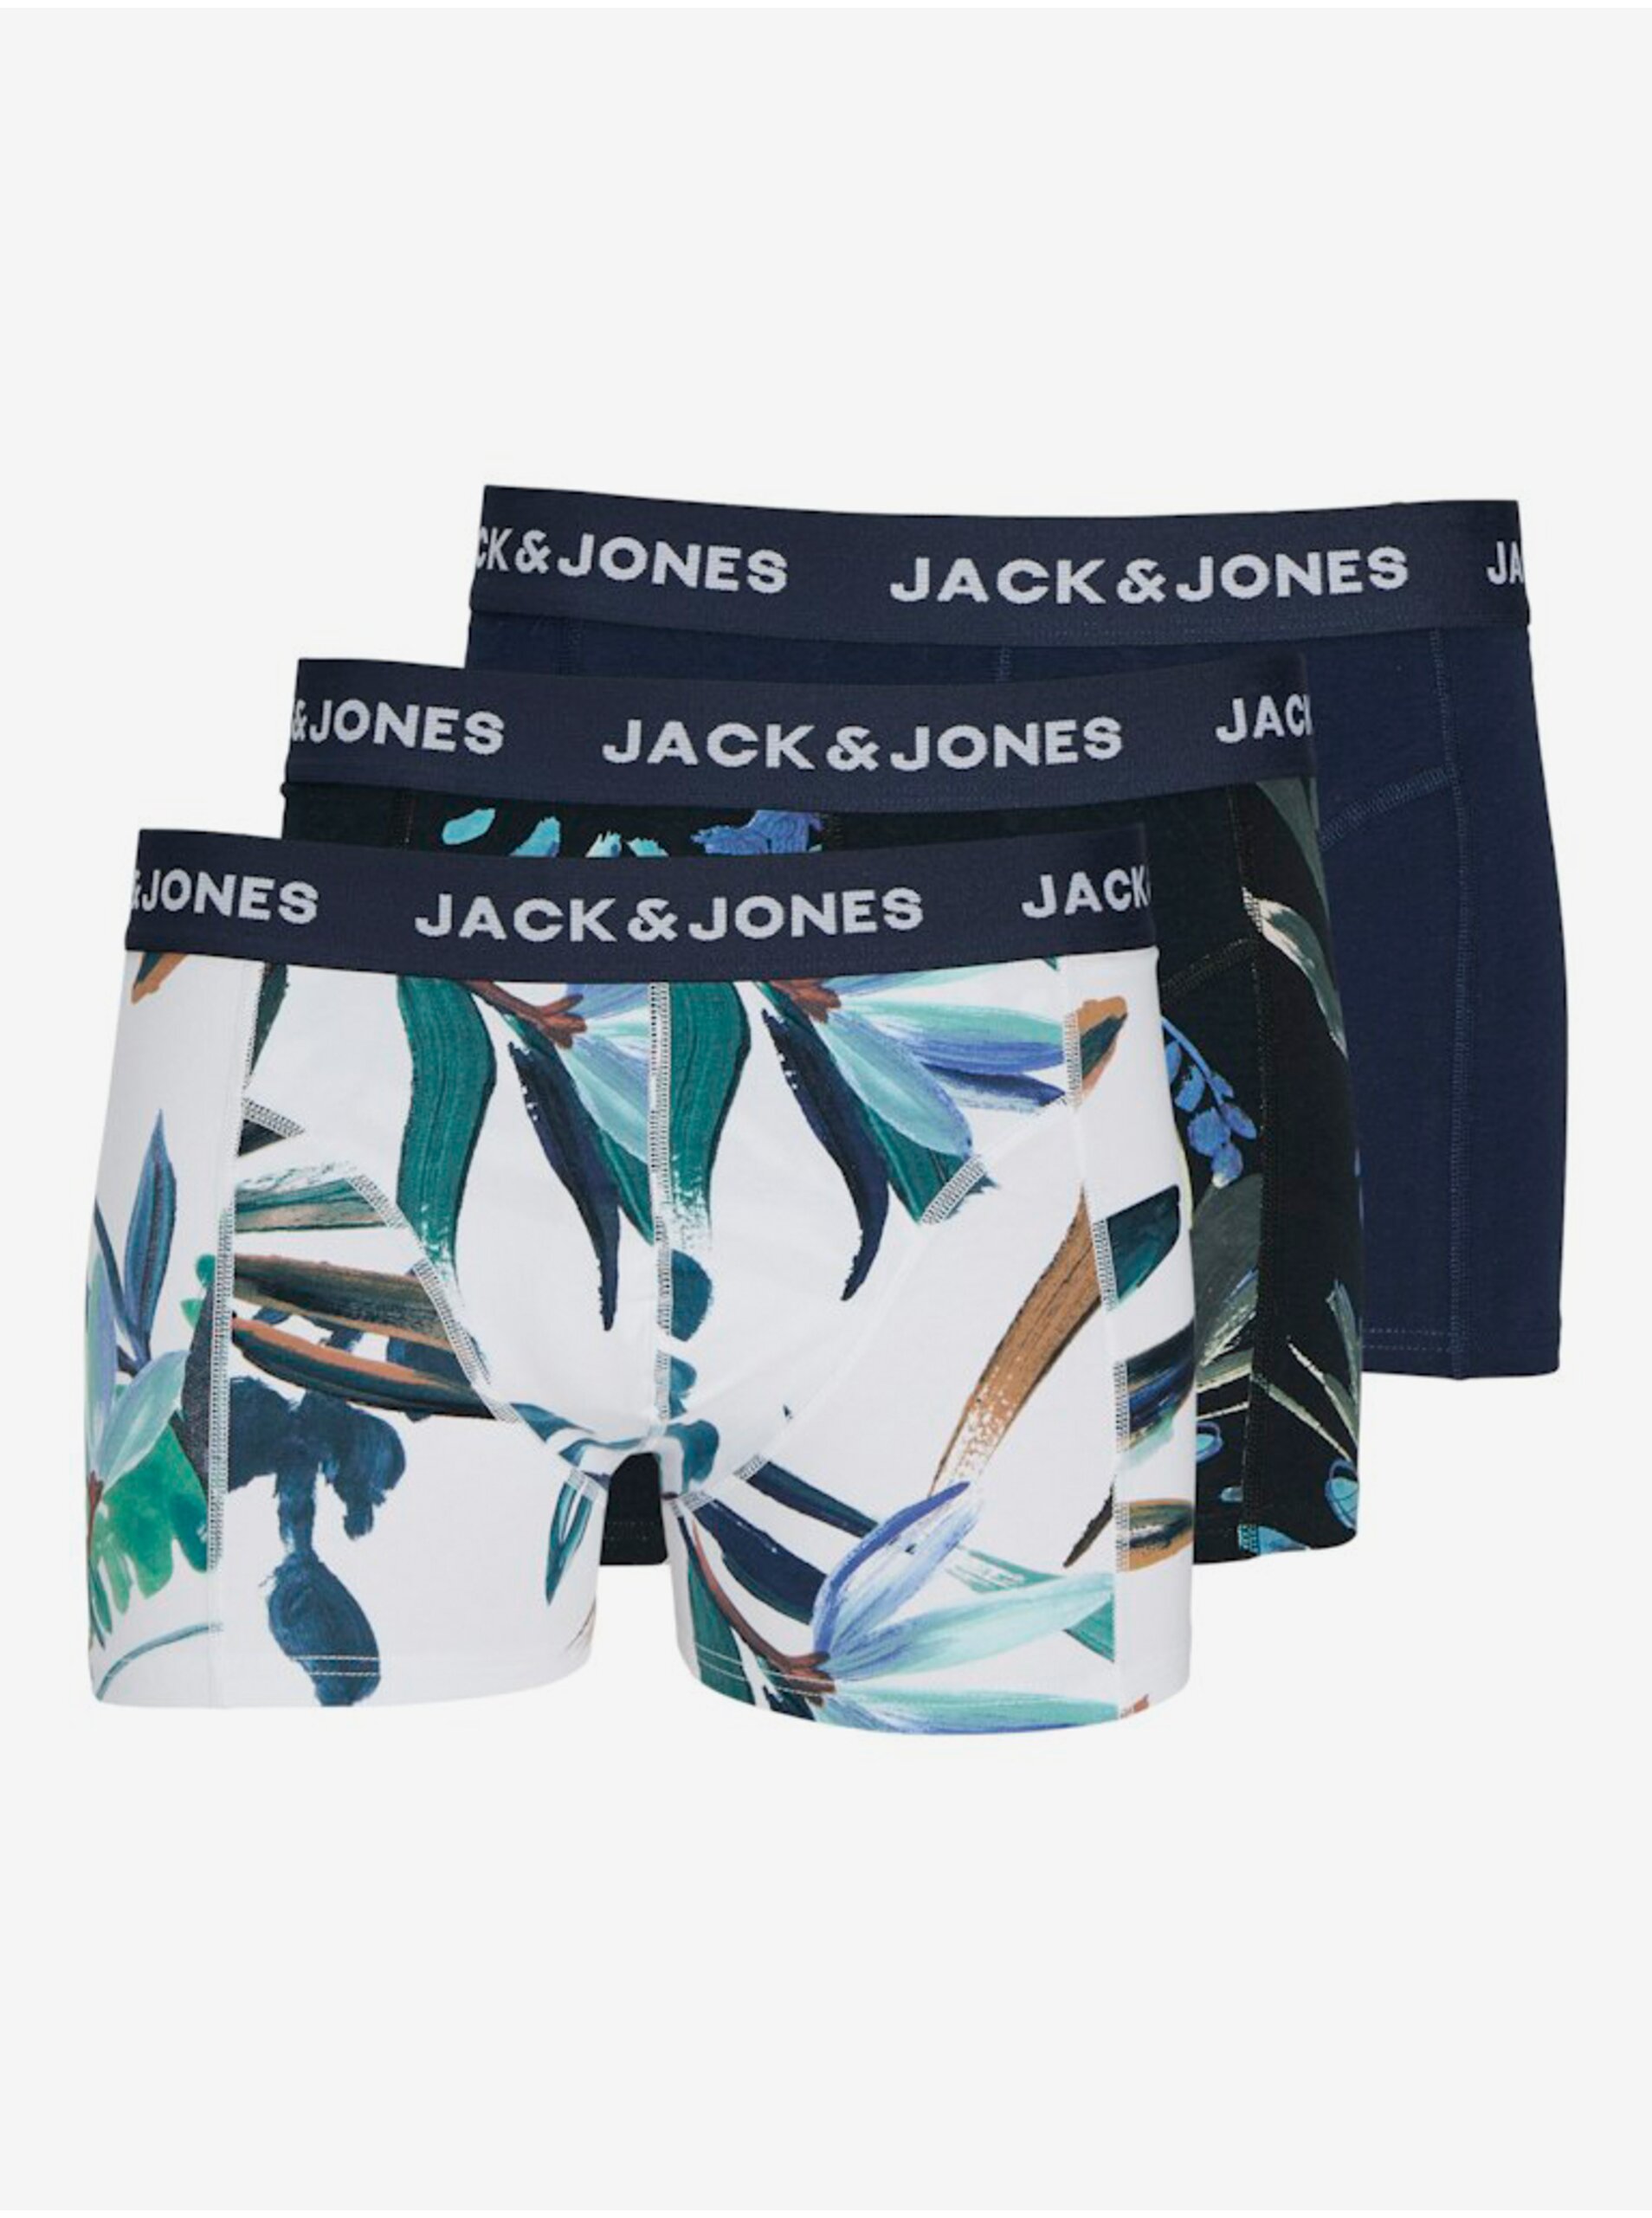 Set of three men's boxer shorts in blue and white by Jack & Jones - Men